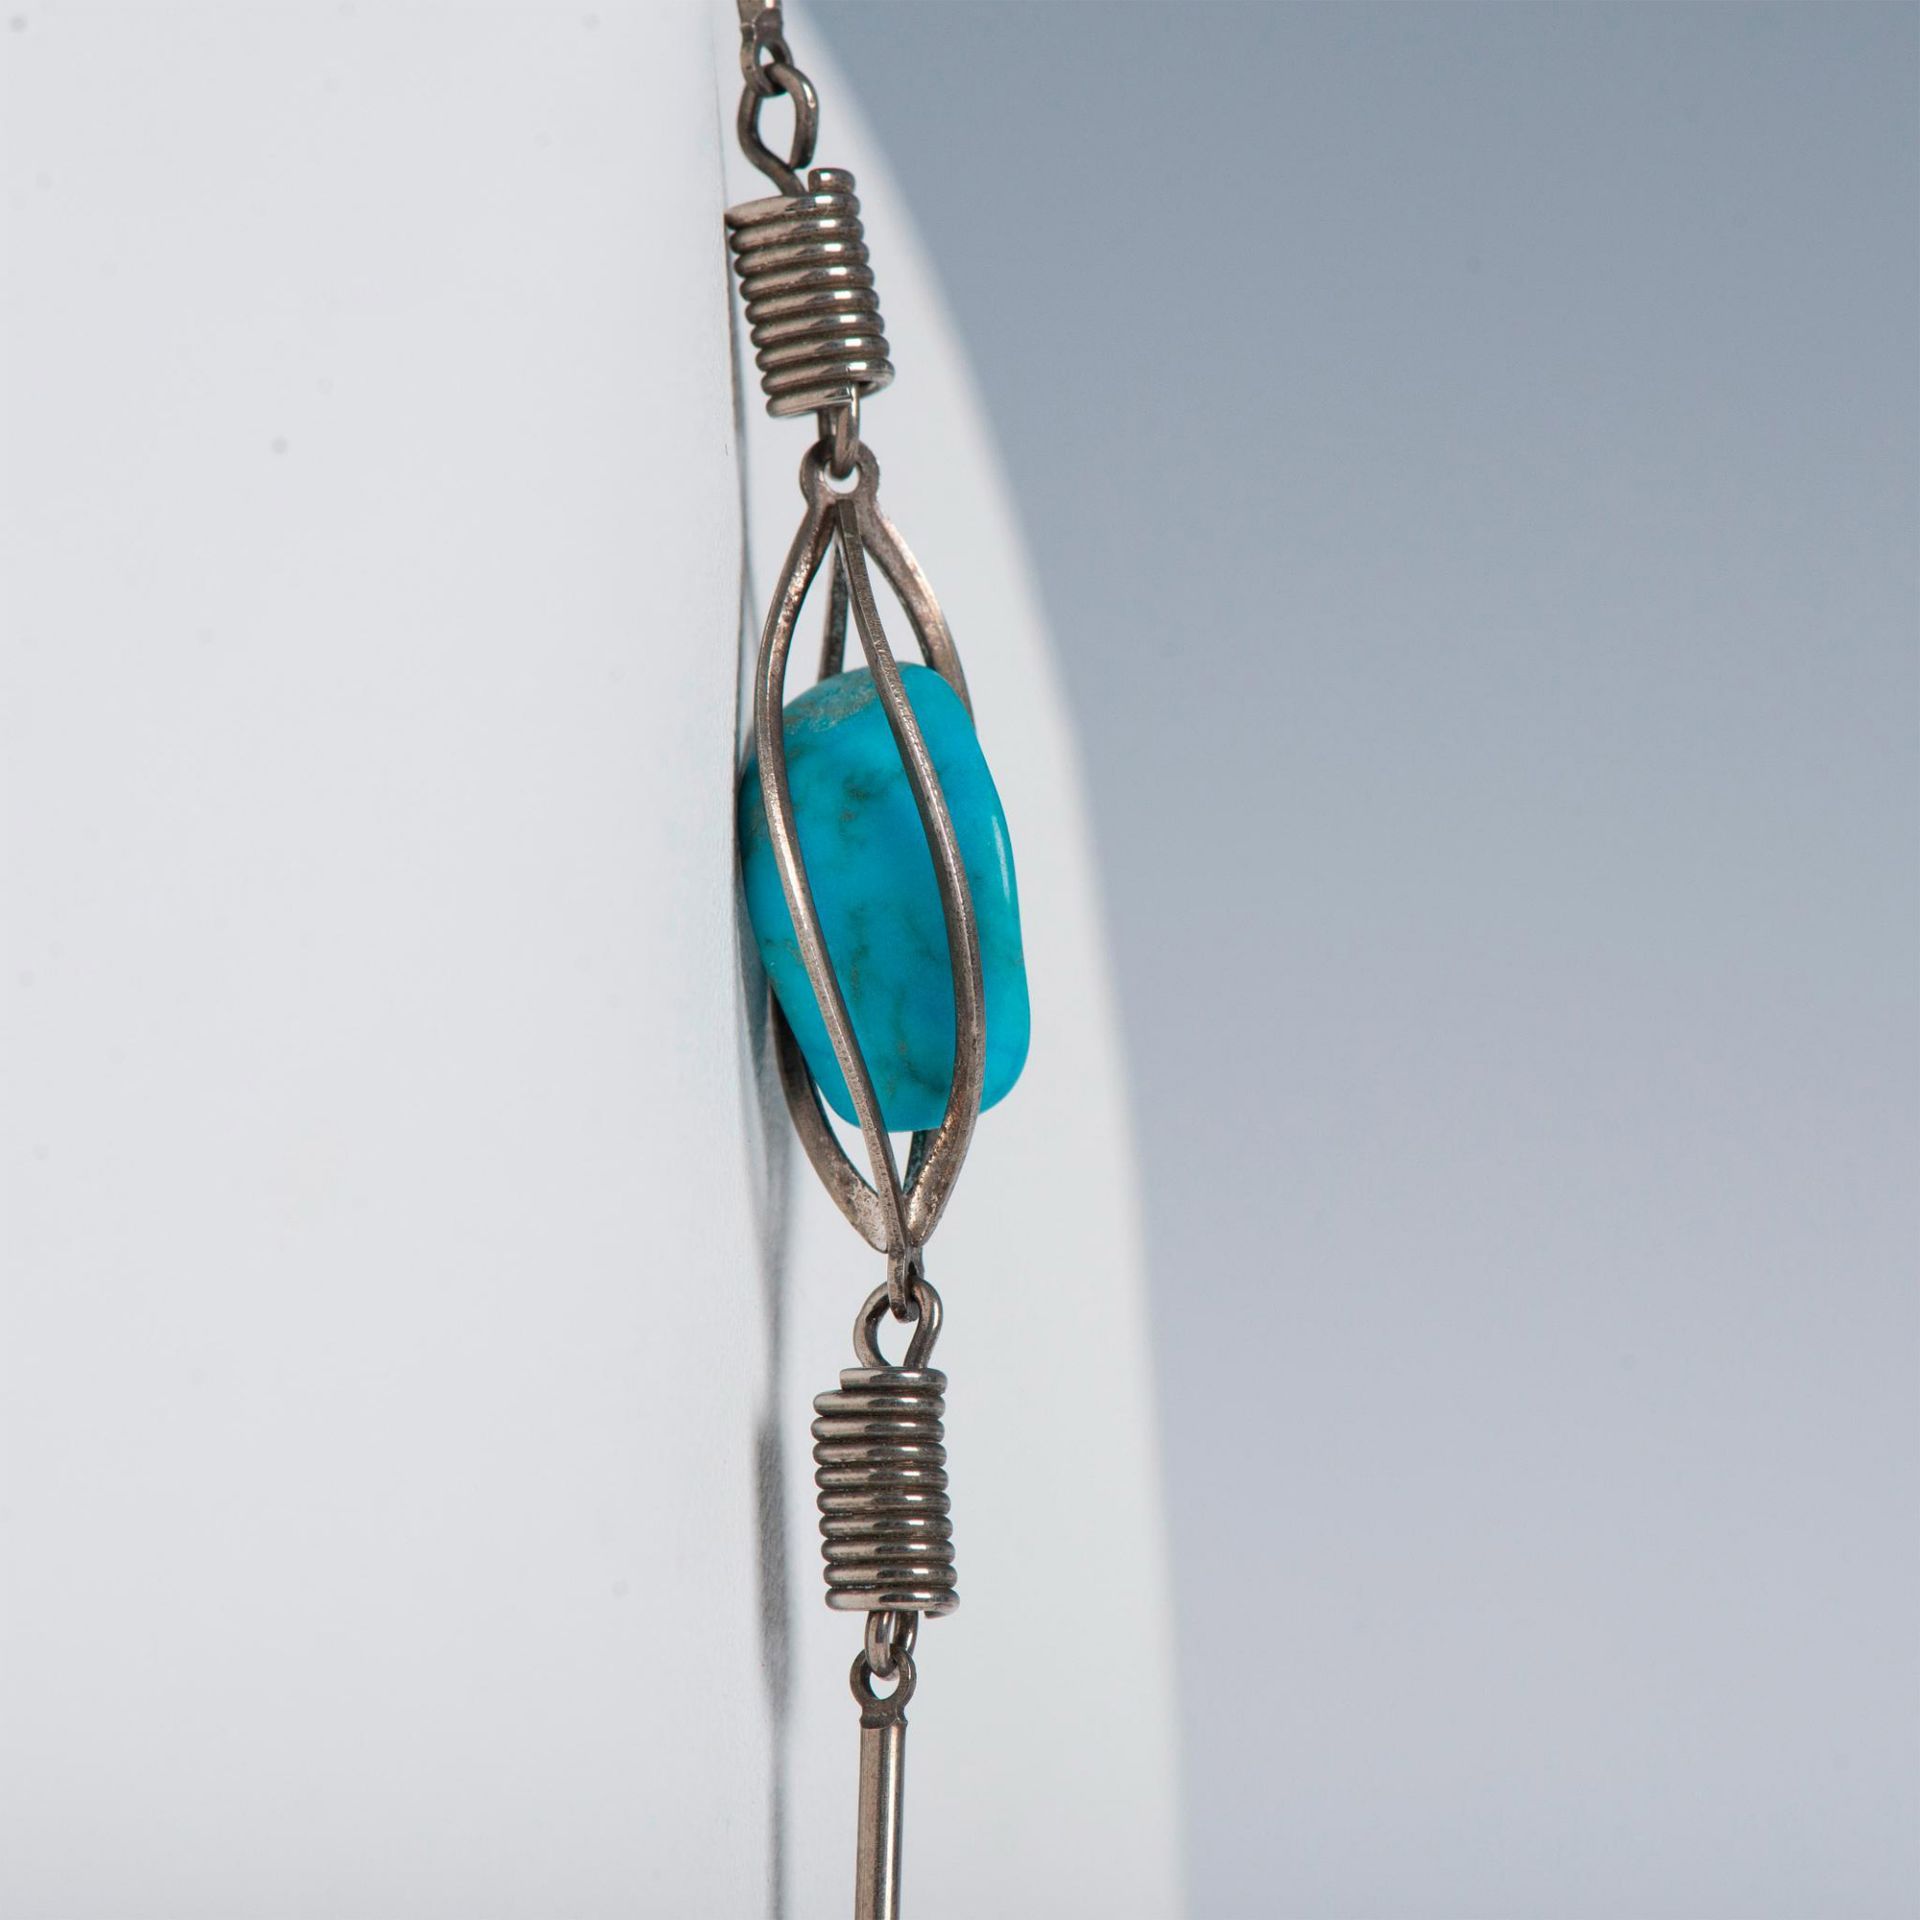 Silver Metal and Turquoise Necklace - Image 3 of 3